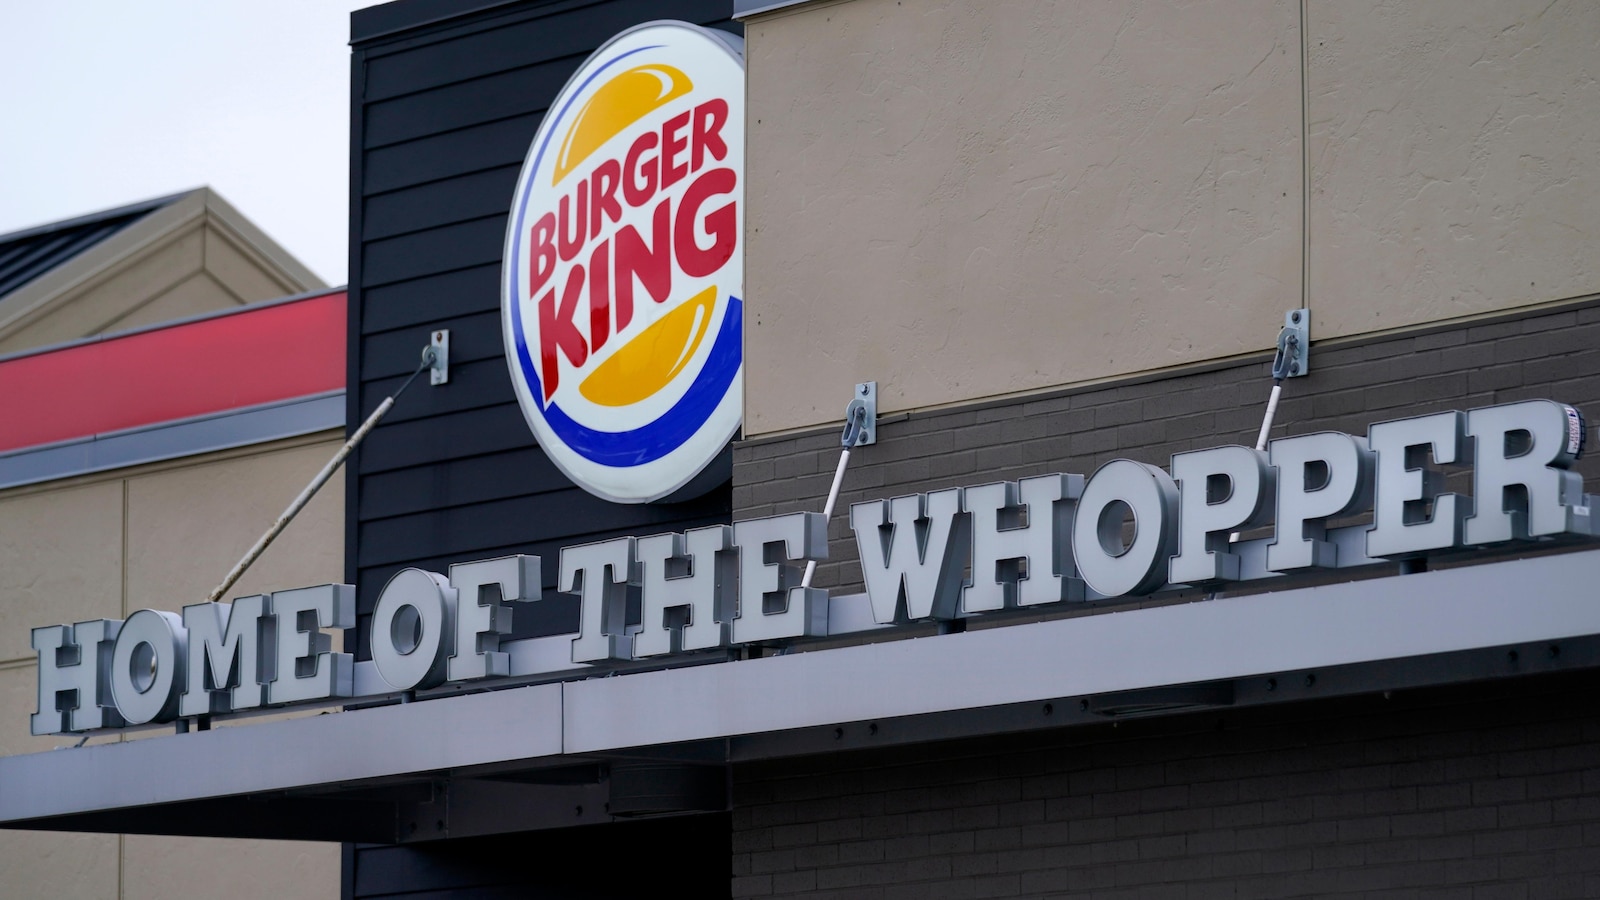 Burger King's Owner to Acquire Largest US Franchisee for Approximately $1 Billion